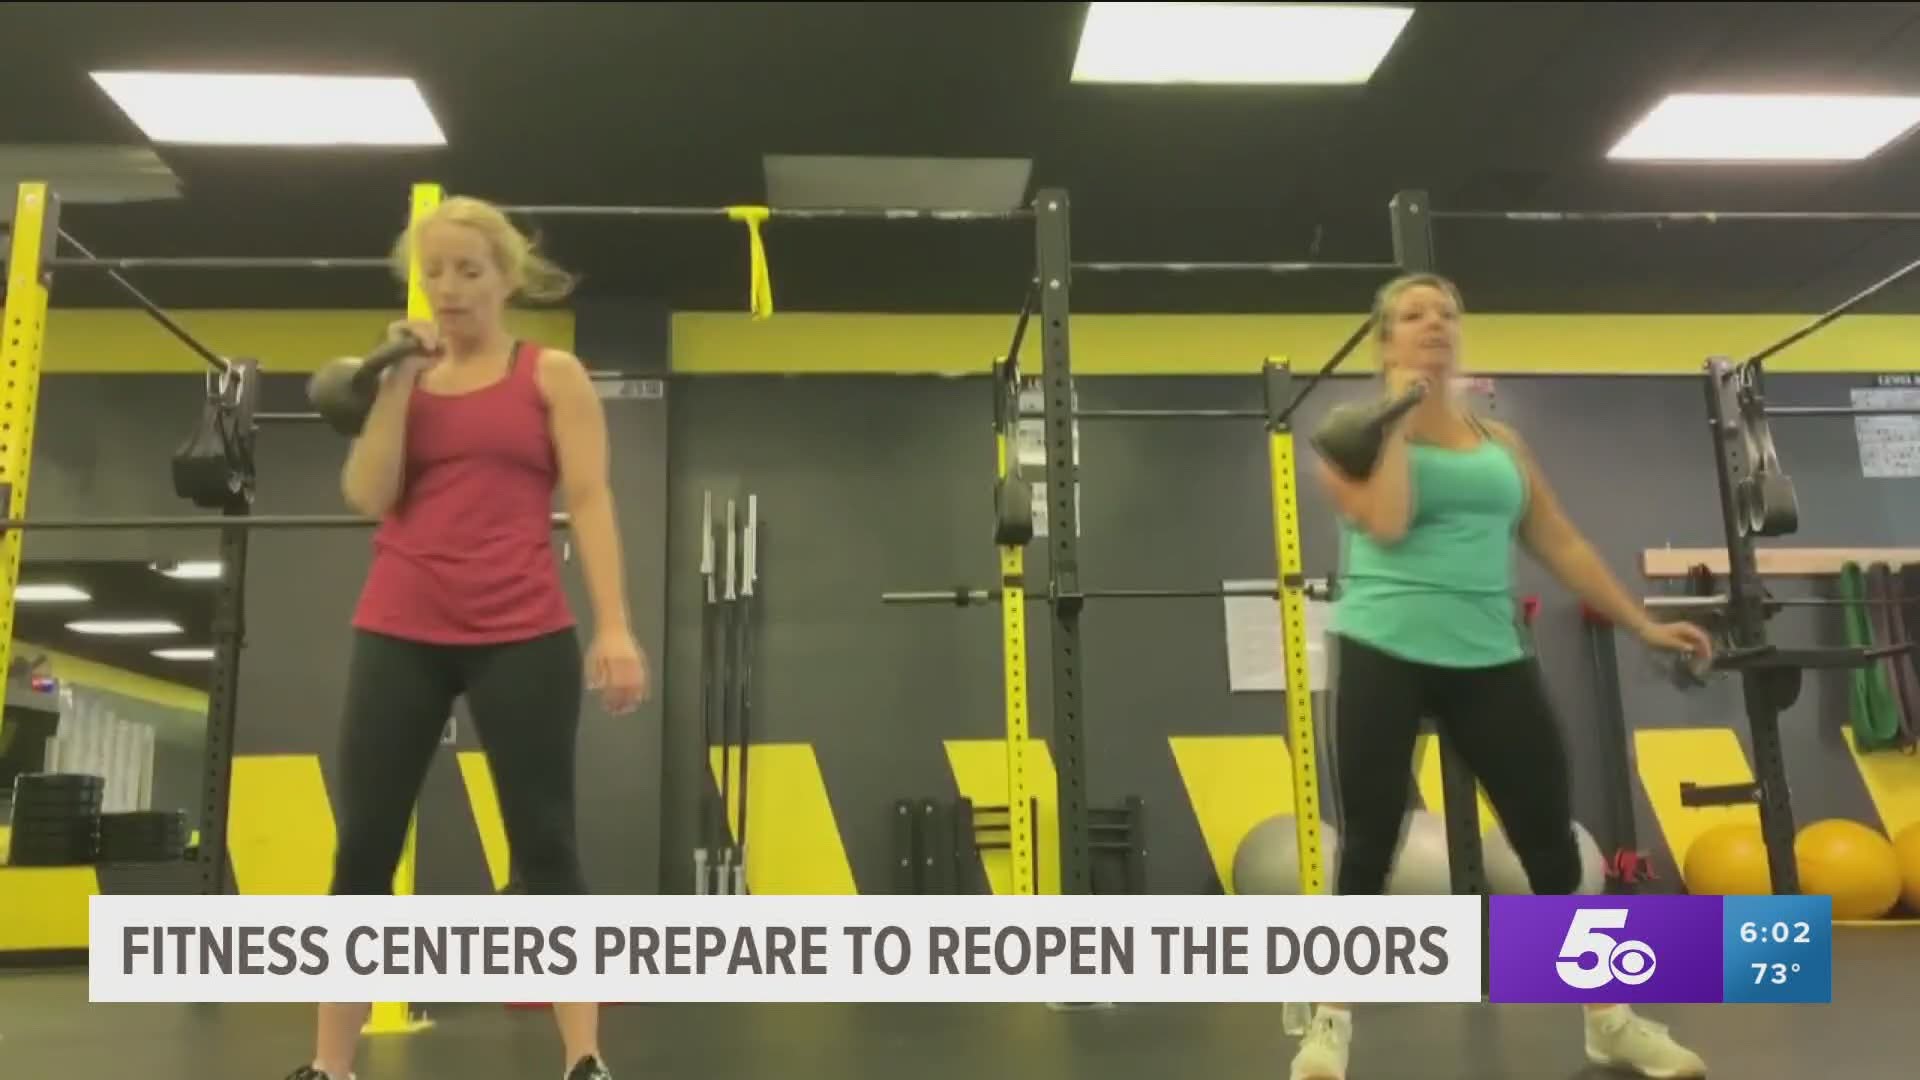 Fitness centers prepare to reopen